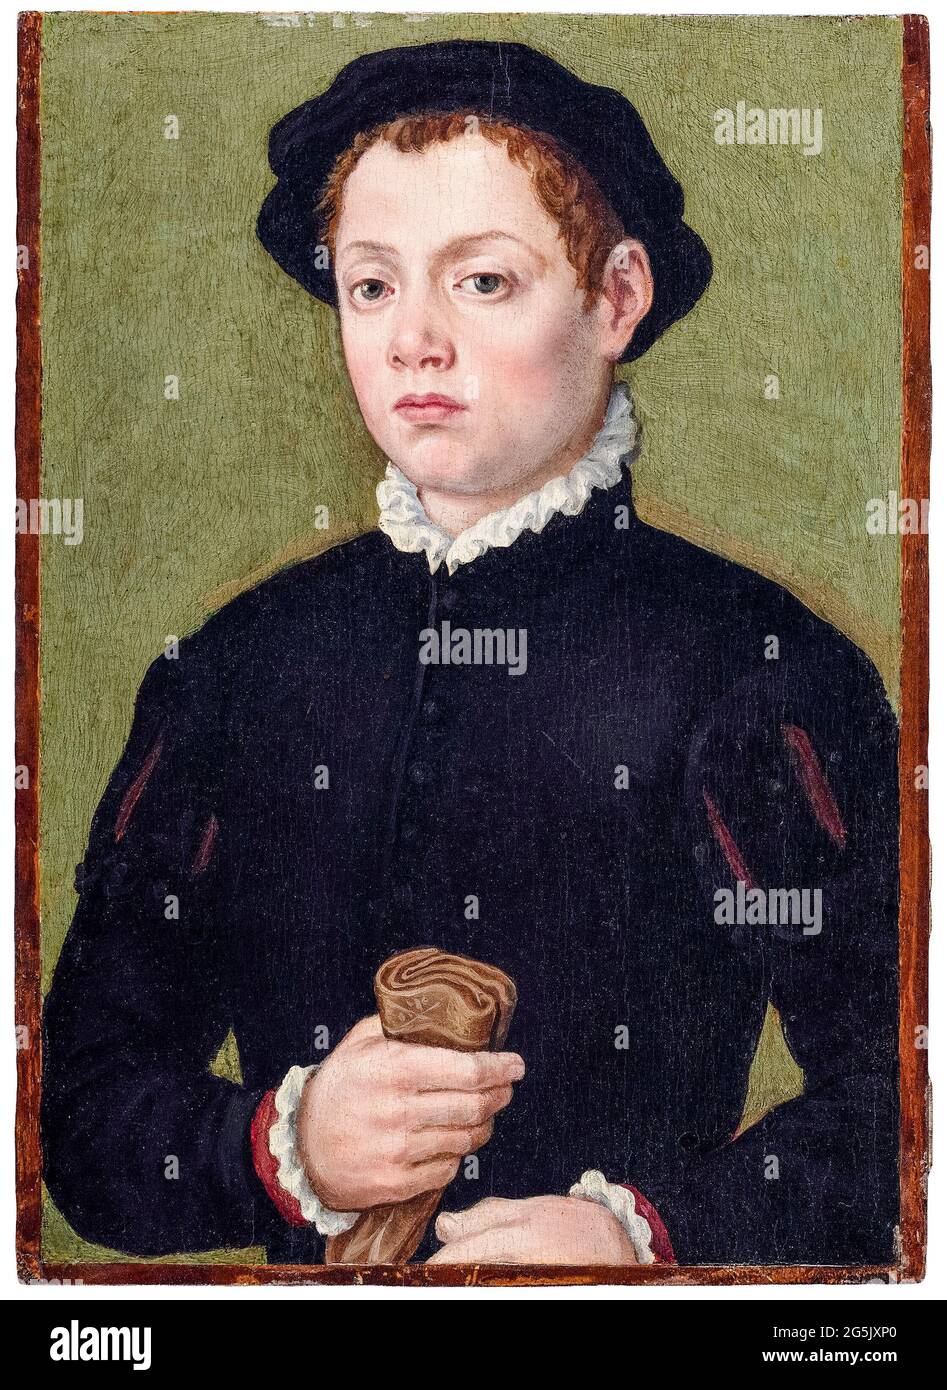 Sofonisba Anguissola, Portrait of a young man, painting, before 1625 Stock Photo